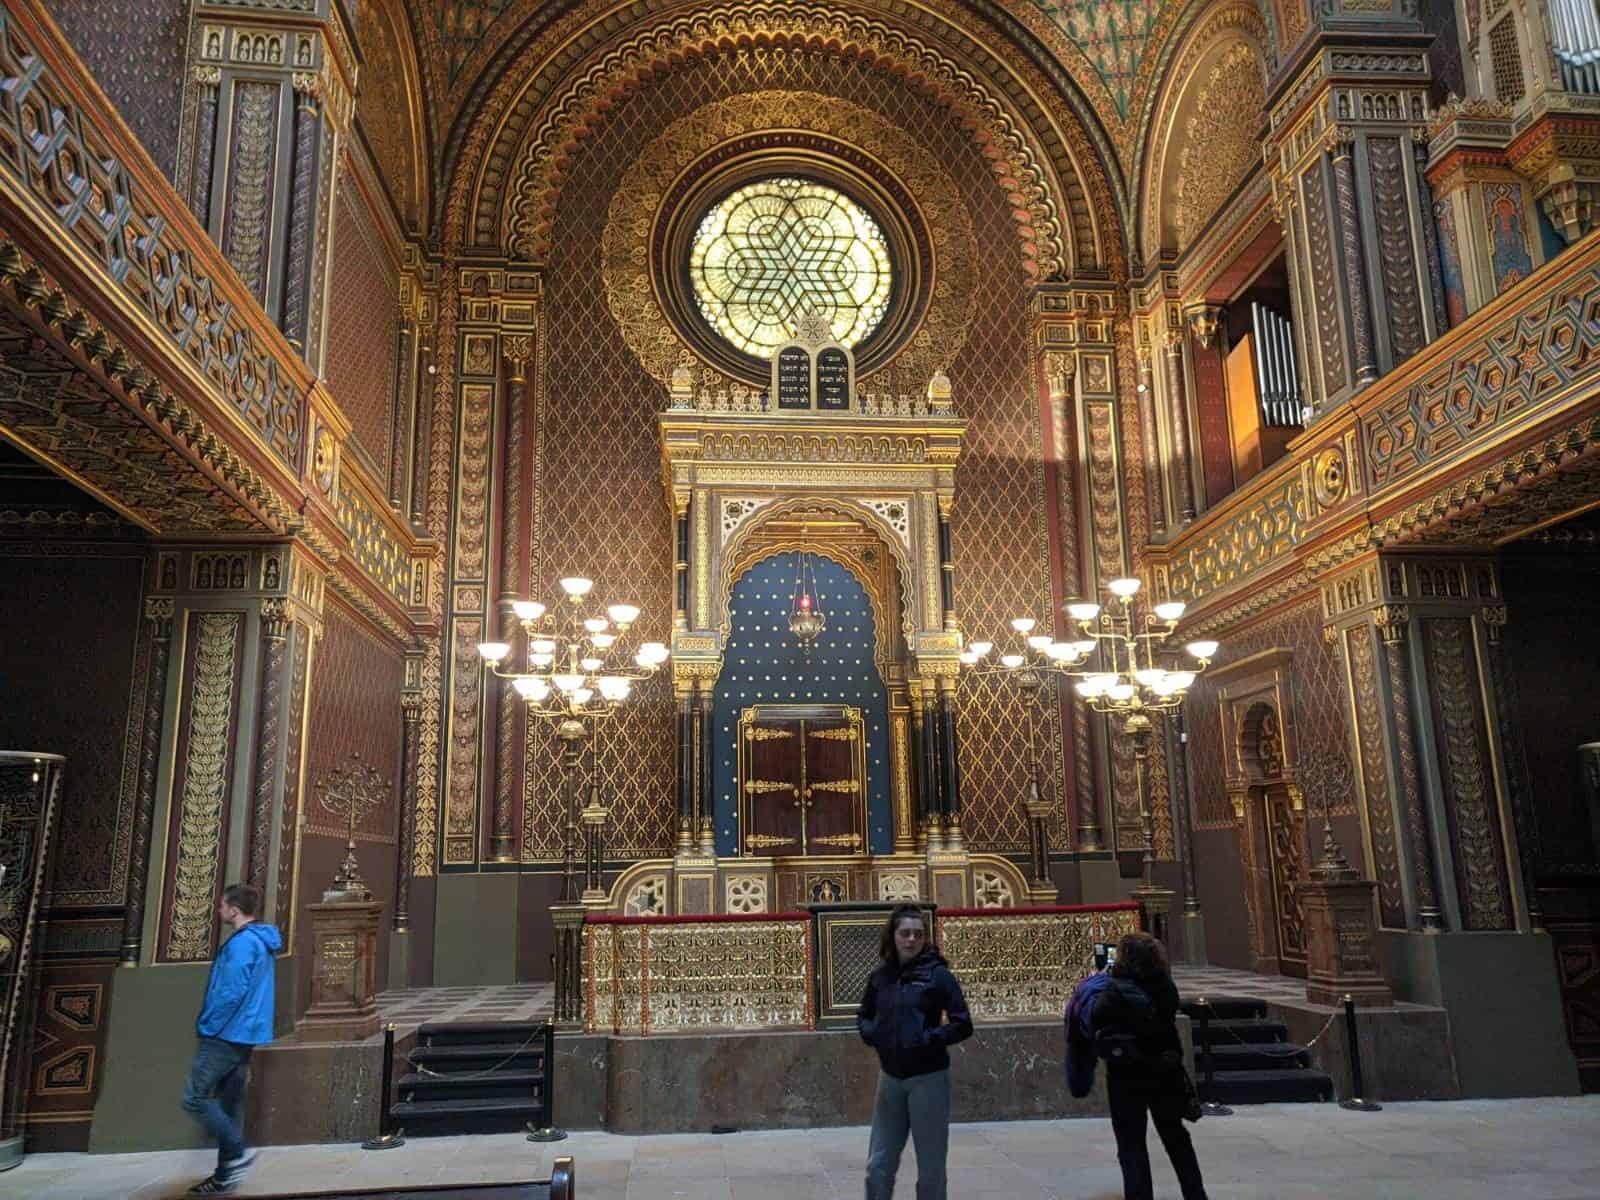 Within the Spanish Synagogue